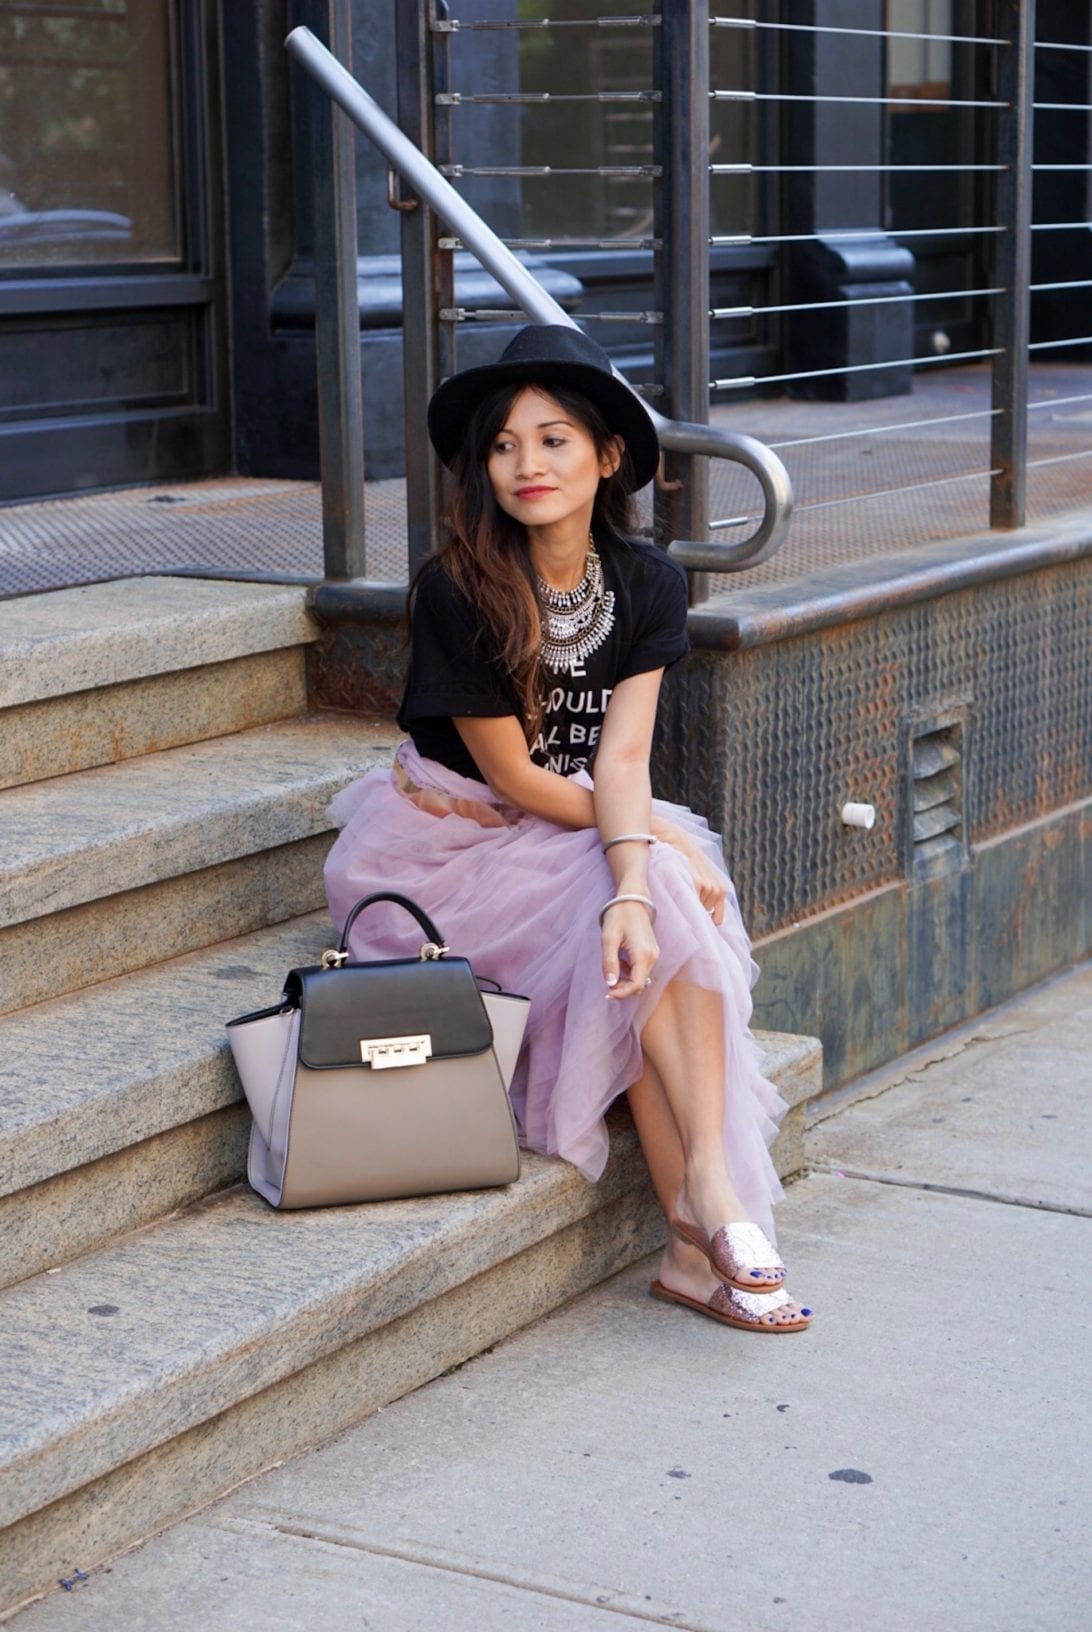 NYC STREET STYLE, New York FASHION WEEK, New York CITY, NYFW 2017, NYFW STREET STYLE, STREET STYLE, FEMINIST, TULLE SKIRT, SEX AND THE CITY OUTFIT, NY GLITTER FLATS, ZAC ZAC POSEN BAG, BLACK FEDORA